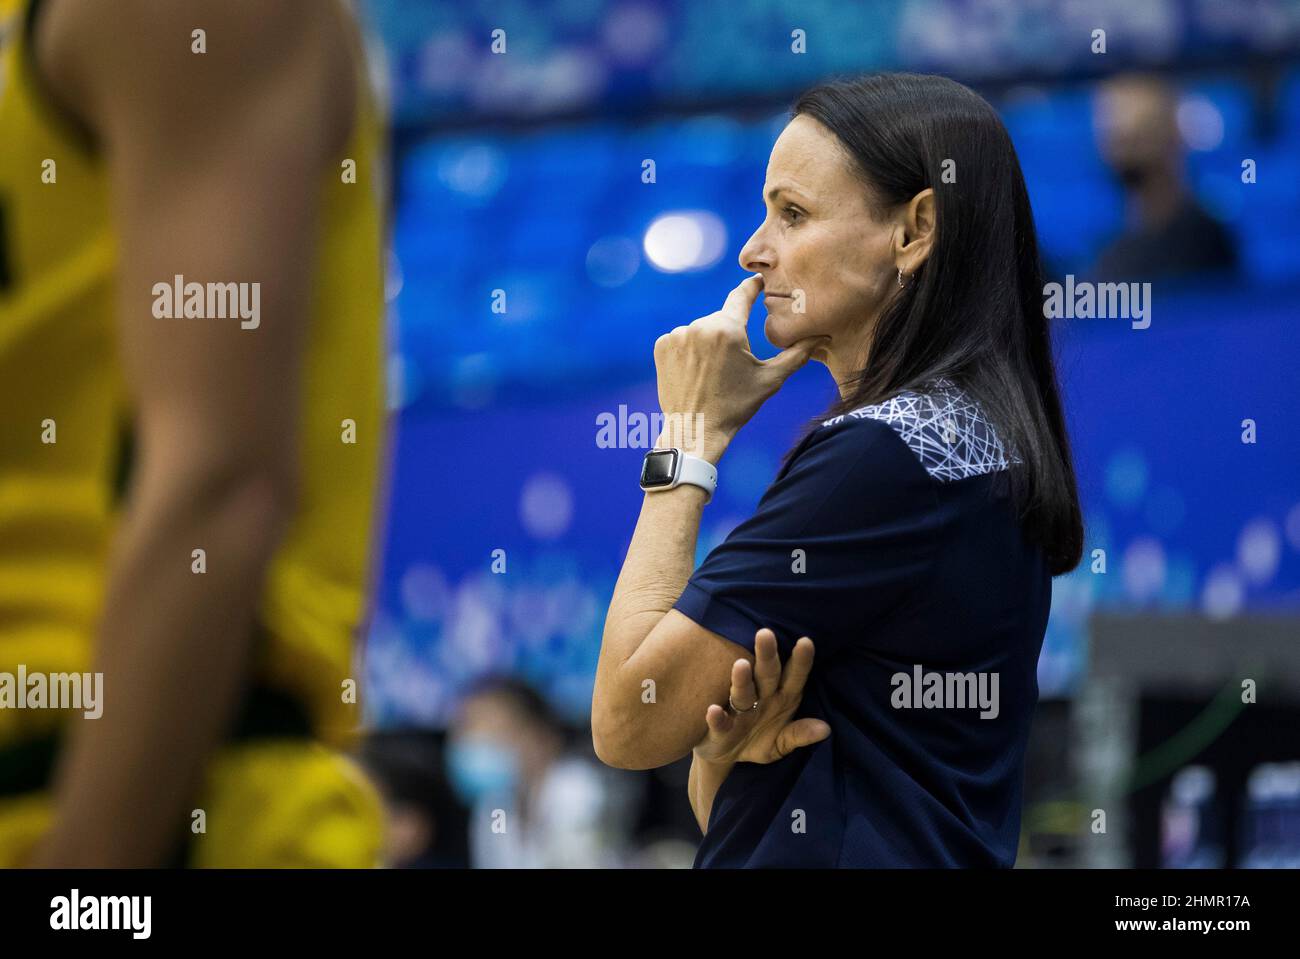 Belgrade, Serbia, 10th February 2022. Head Coach Sandy Brondello of Australia watches her players during the FIBA Women's Basketball World Cup Qualifying Tournament match between Australia v Brazil in Belgrade, Serbia. February 10, 2022. Credit: Nikola Krstic/Alamy Stock Photo